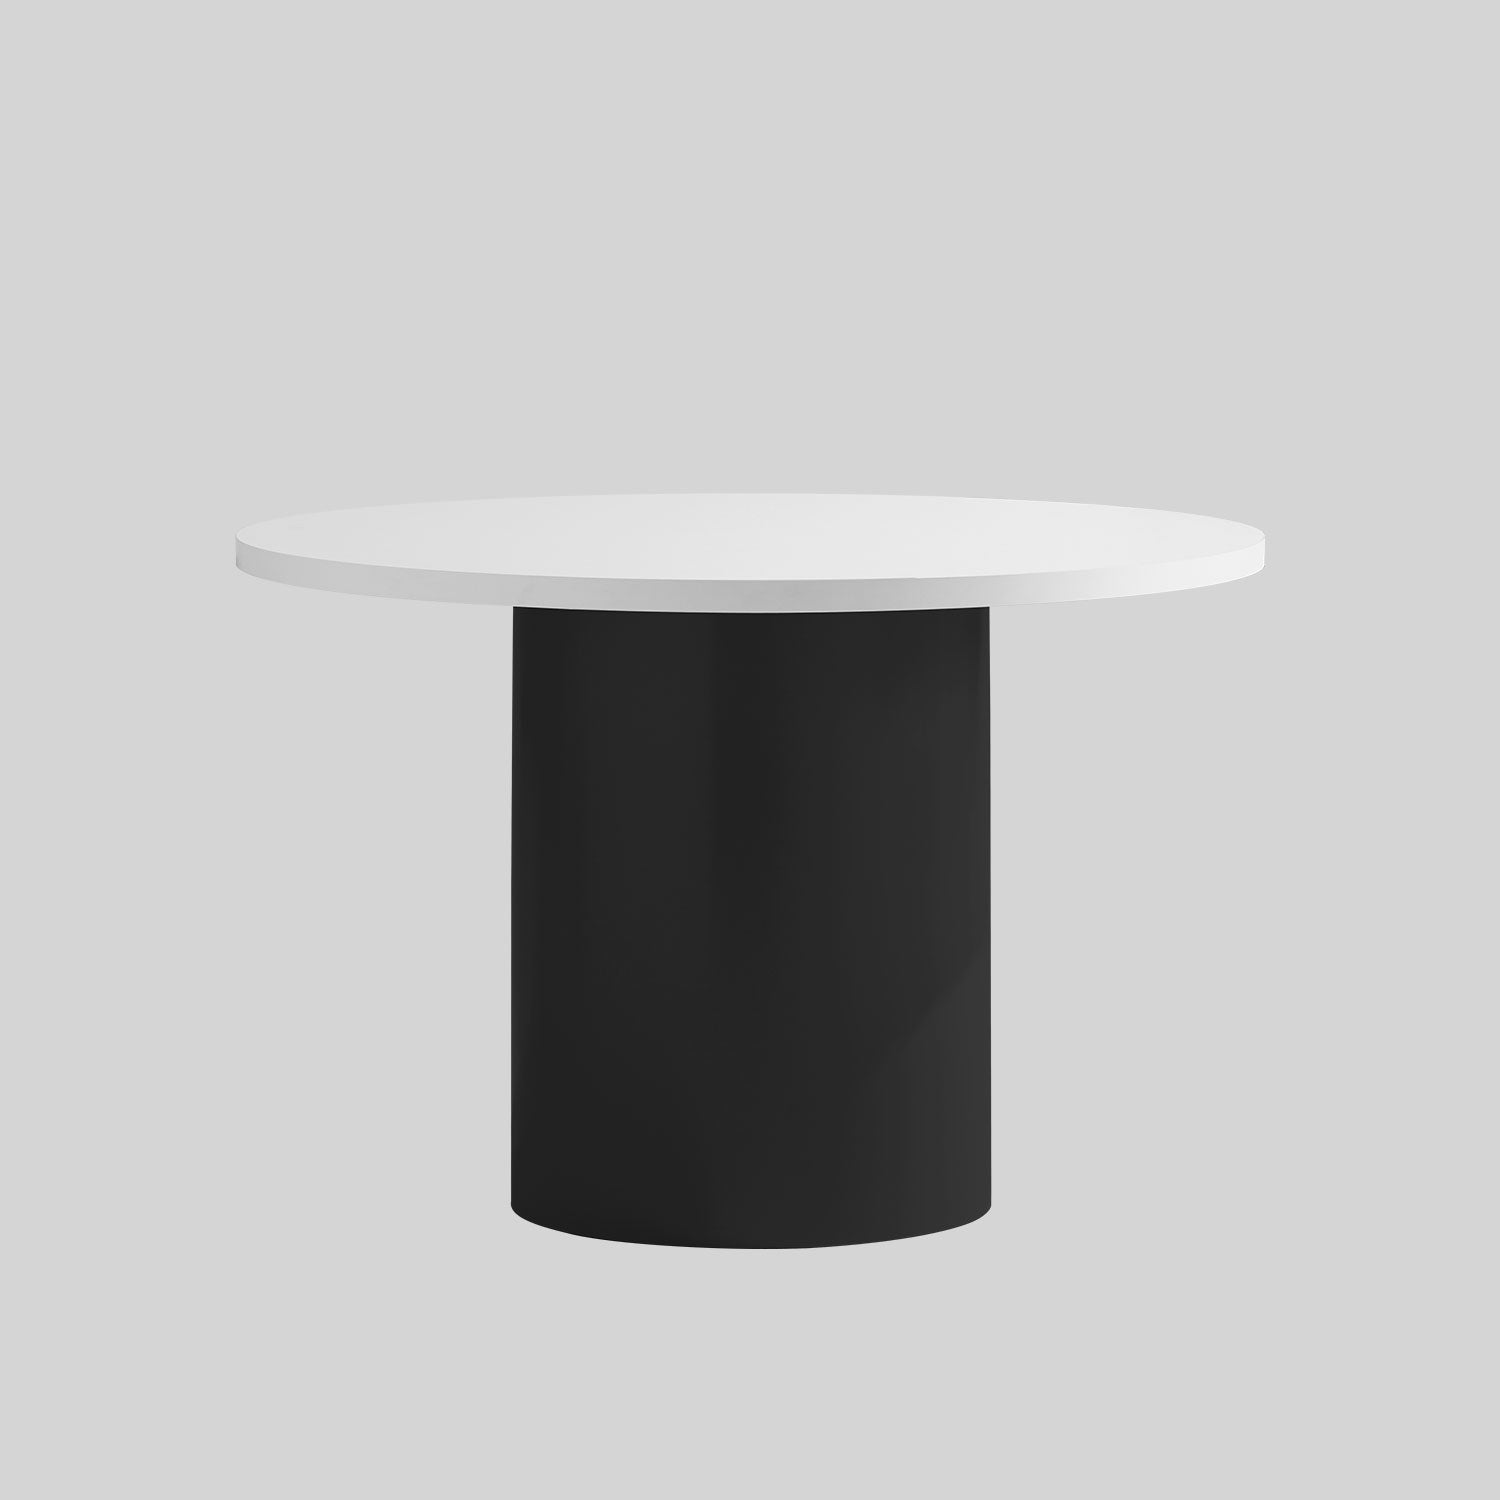 Dial Dining Table | Black, White or Timber Indoor or Outdoor Use | DesignByThem